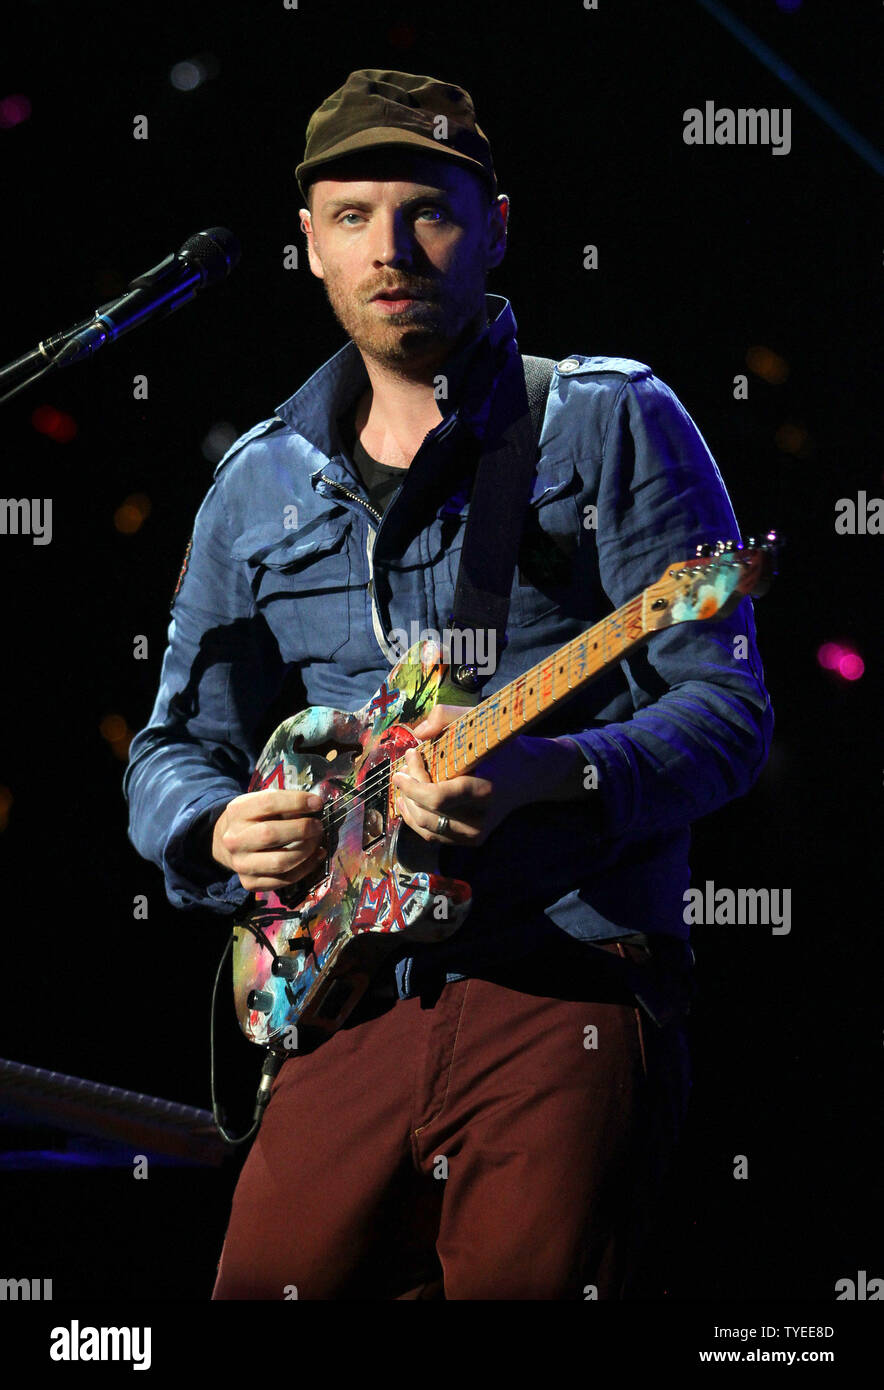 Jonny Buckland with Coldplay performs in concert on their Mylo Xyloto tour 2012 at the American Airlines Arena in Miami on June 29, 2012. UPI/Michael Bush Stock Photo